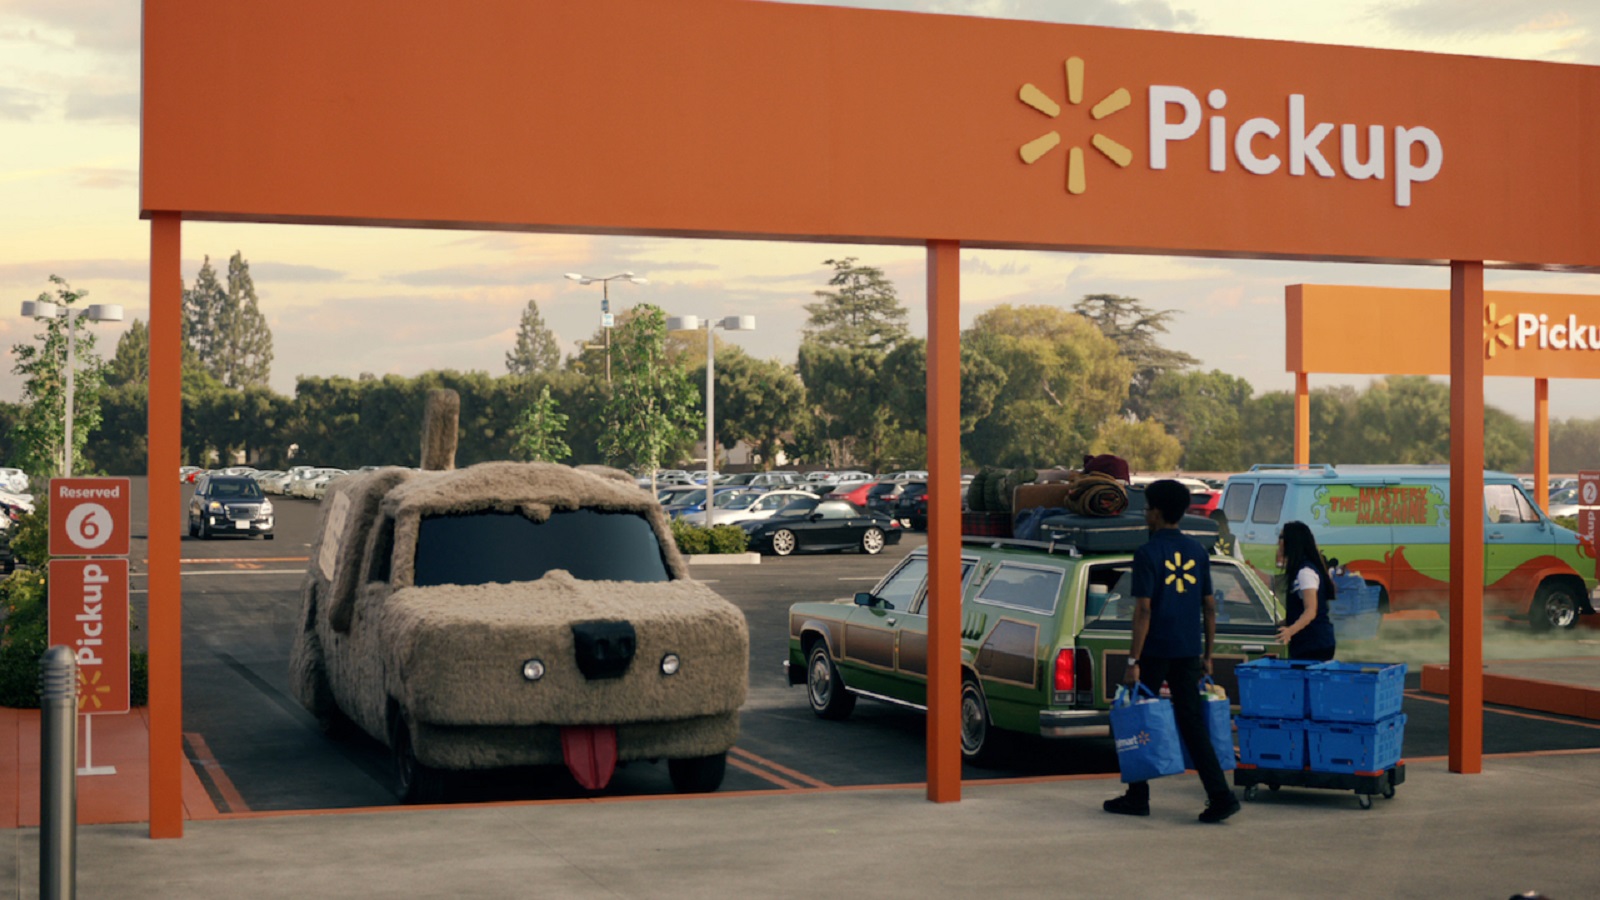 Walmart Takes the Wheel of Famous Cars to Promote Pickup Services